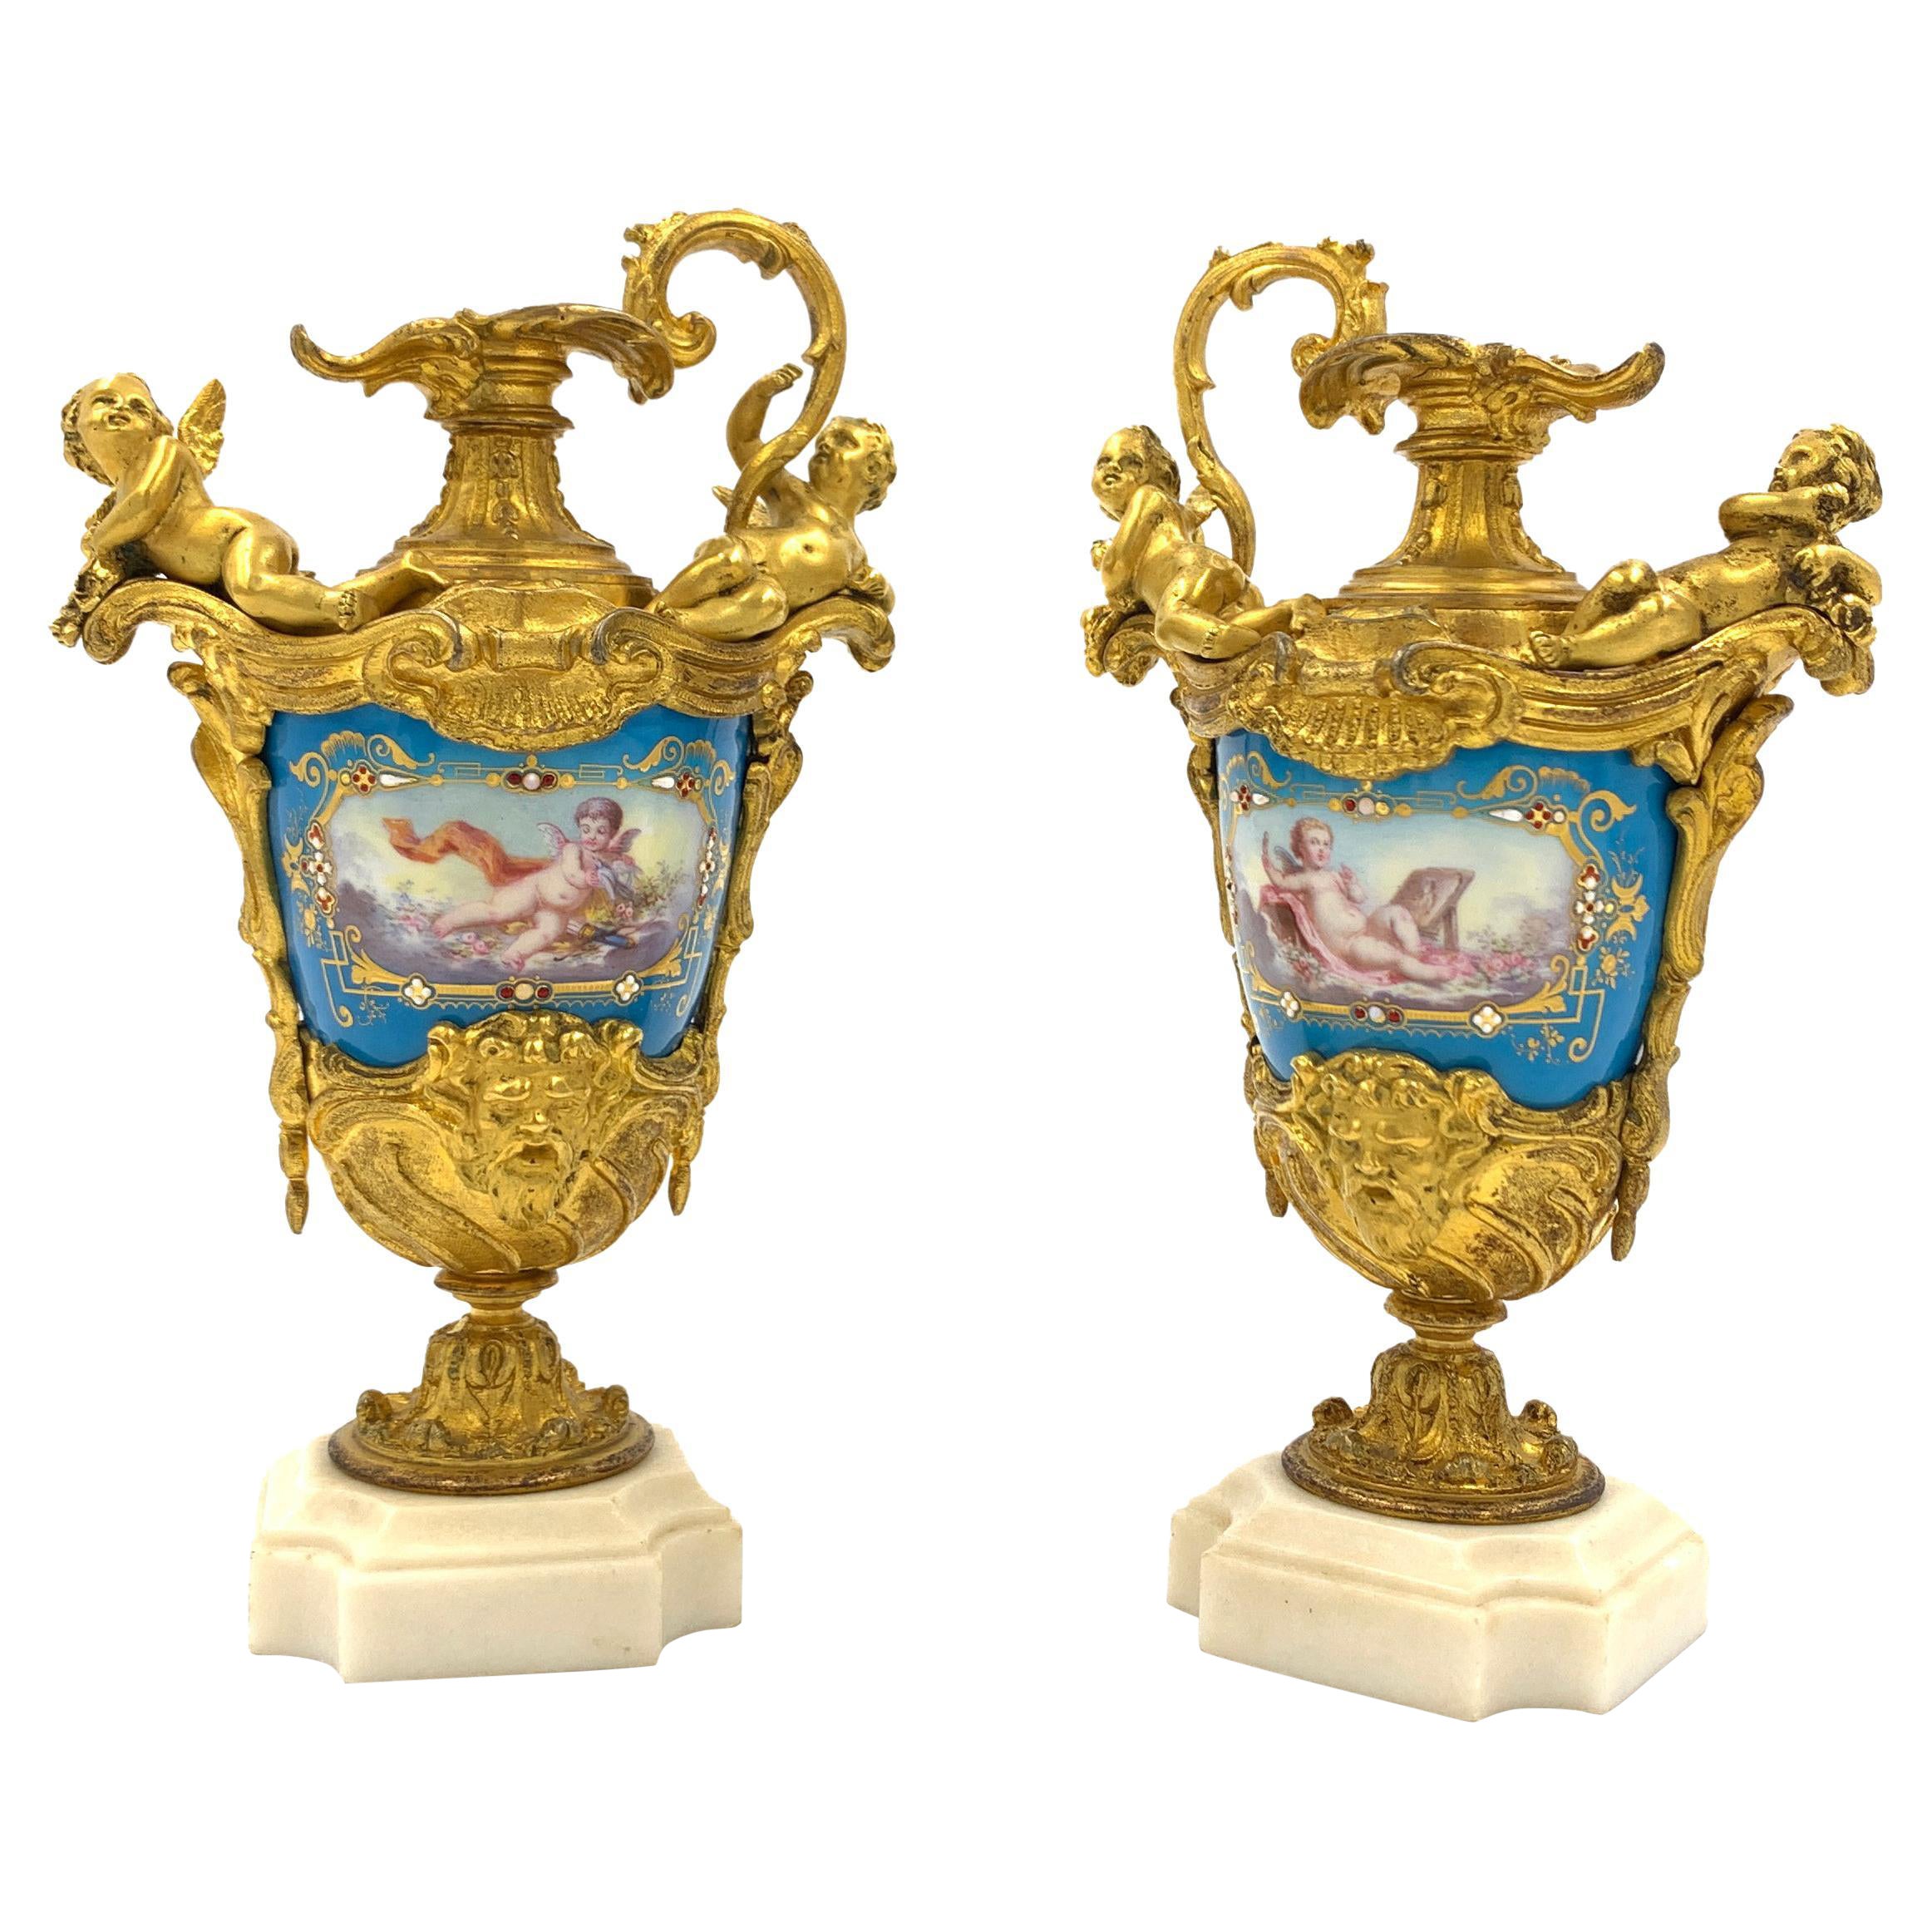 Pair of Sevres Style Jewelled Porcelain and Gilt Metal Ewer Vases